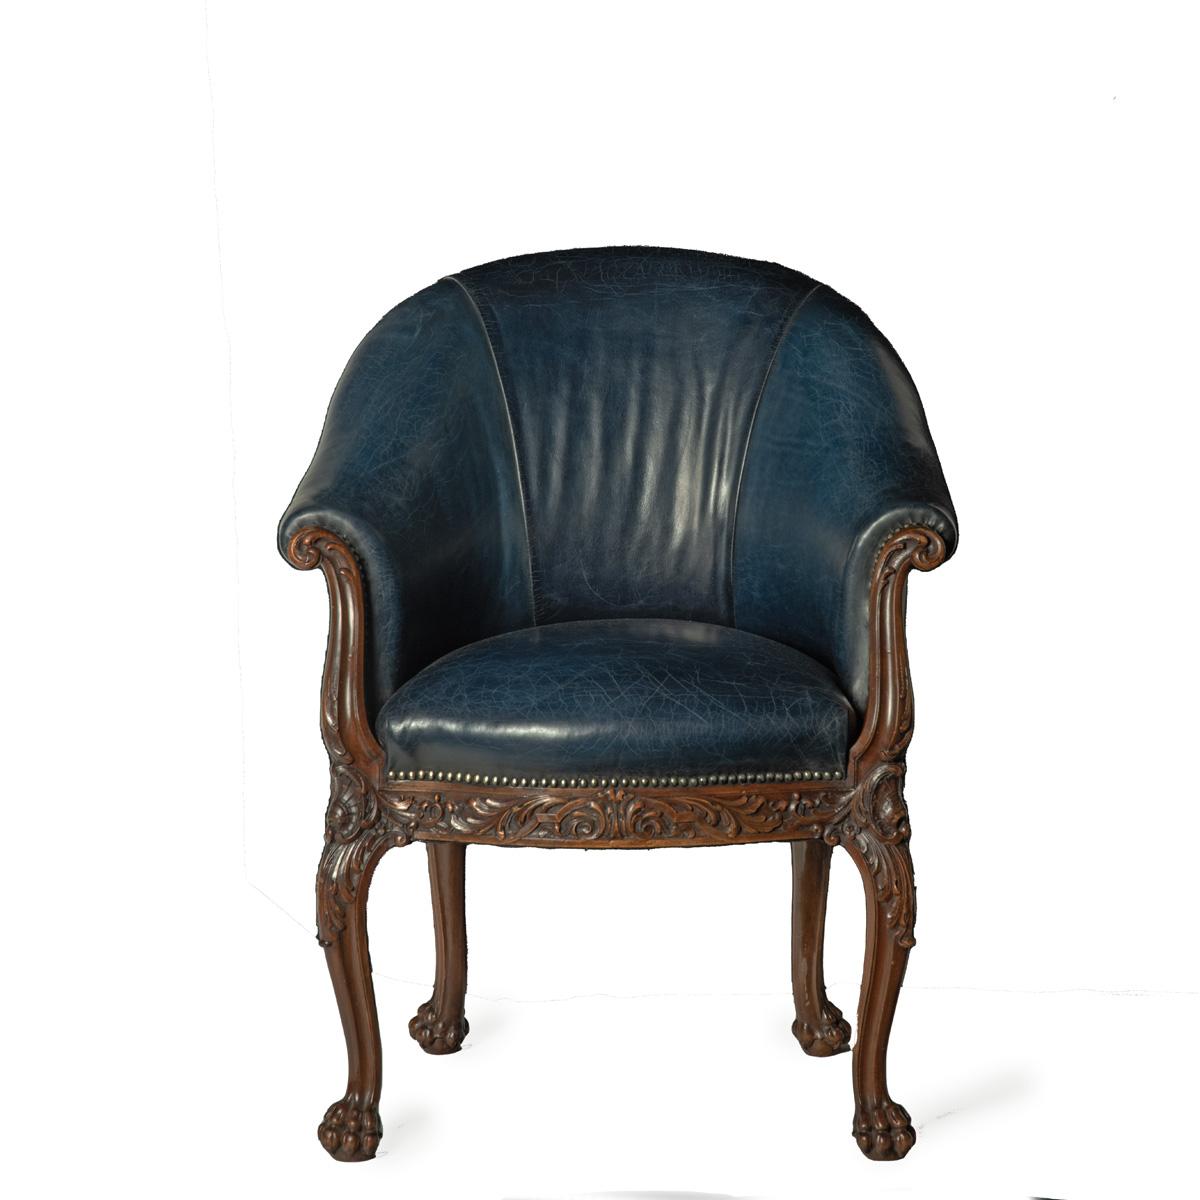 Victorian blue leather and walnut tub chairs